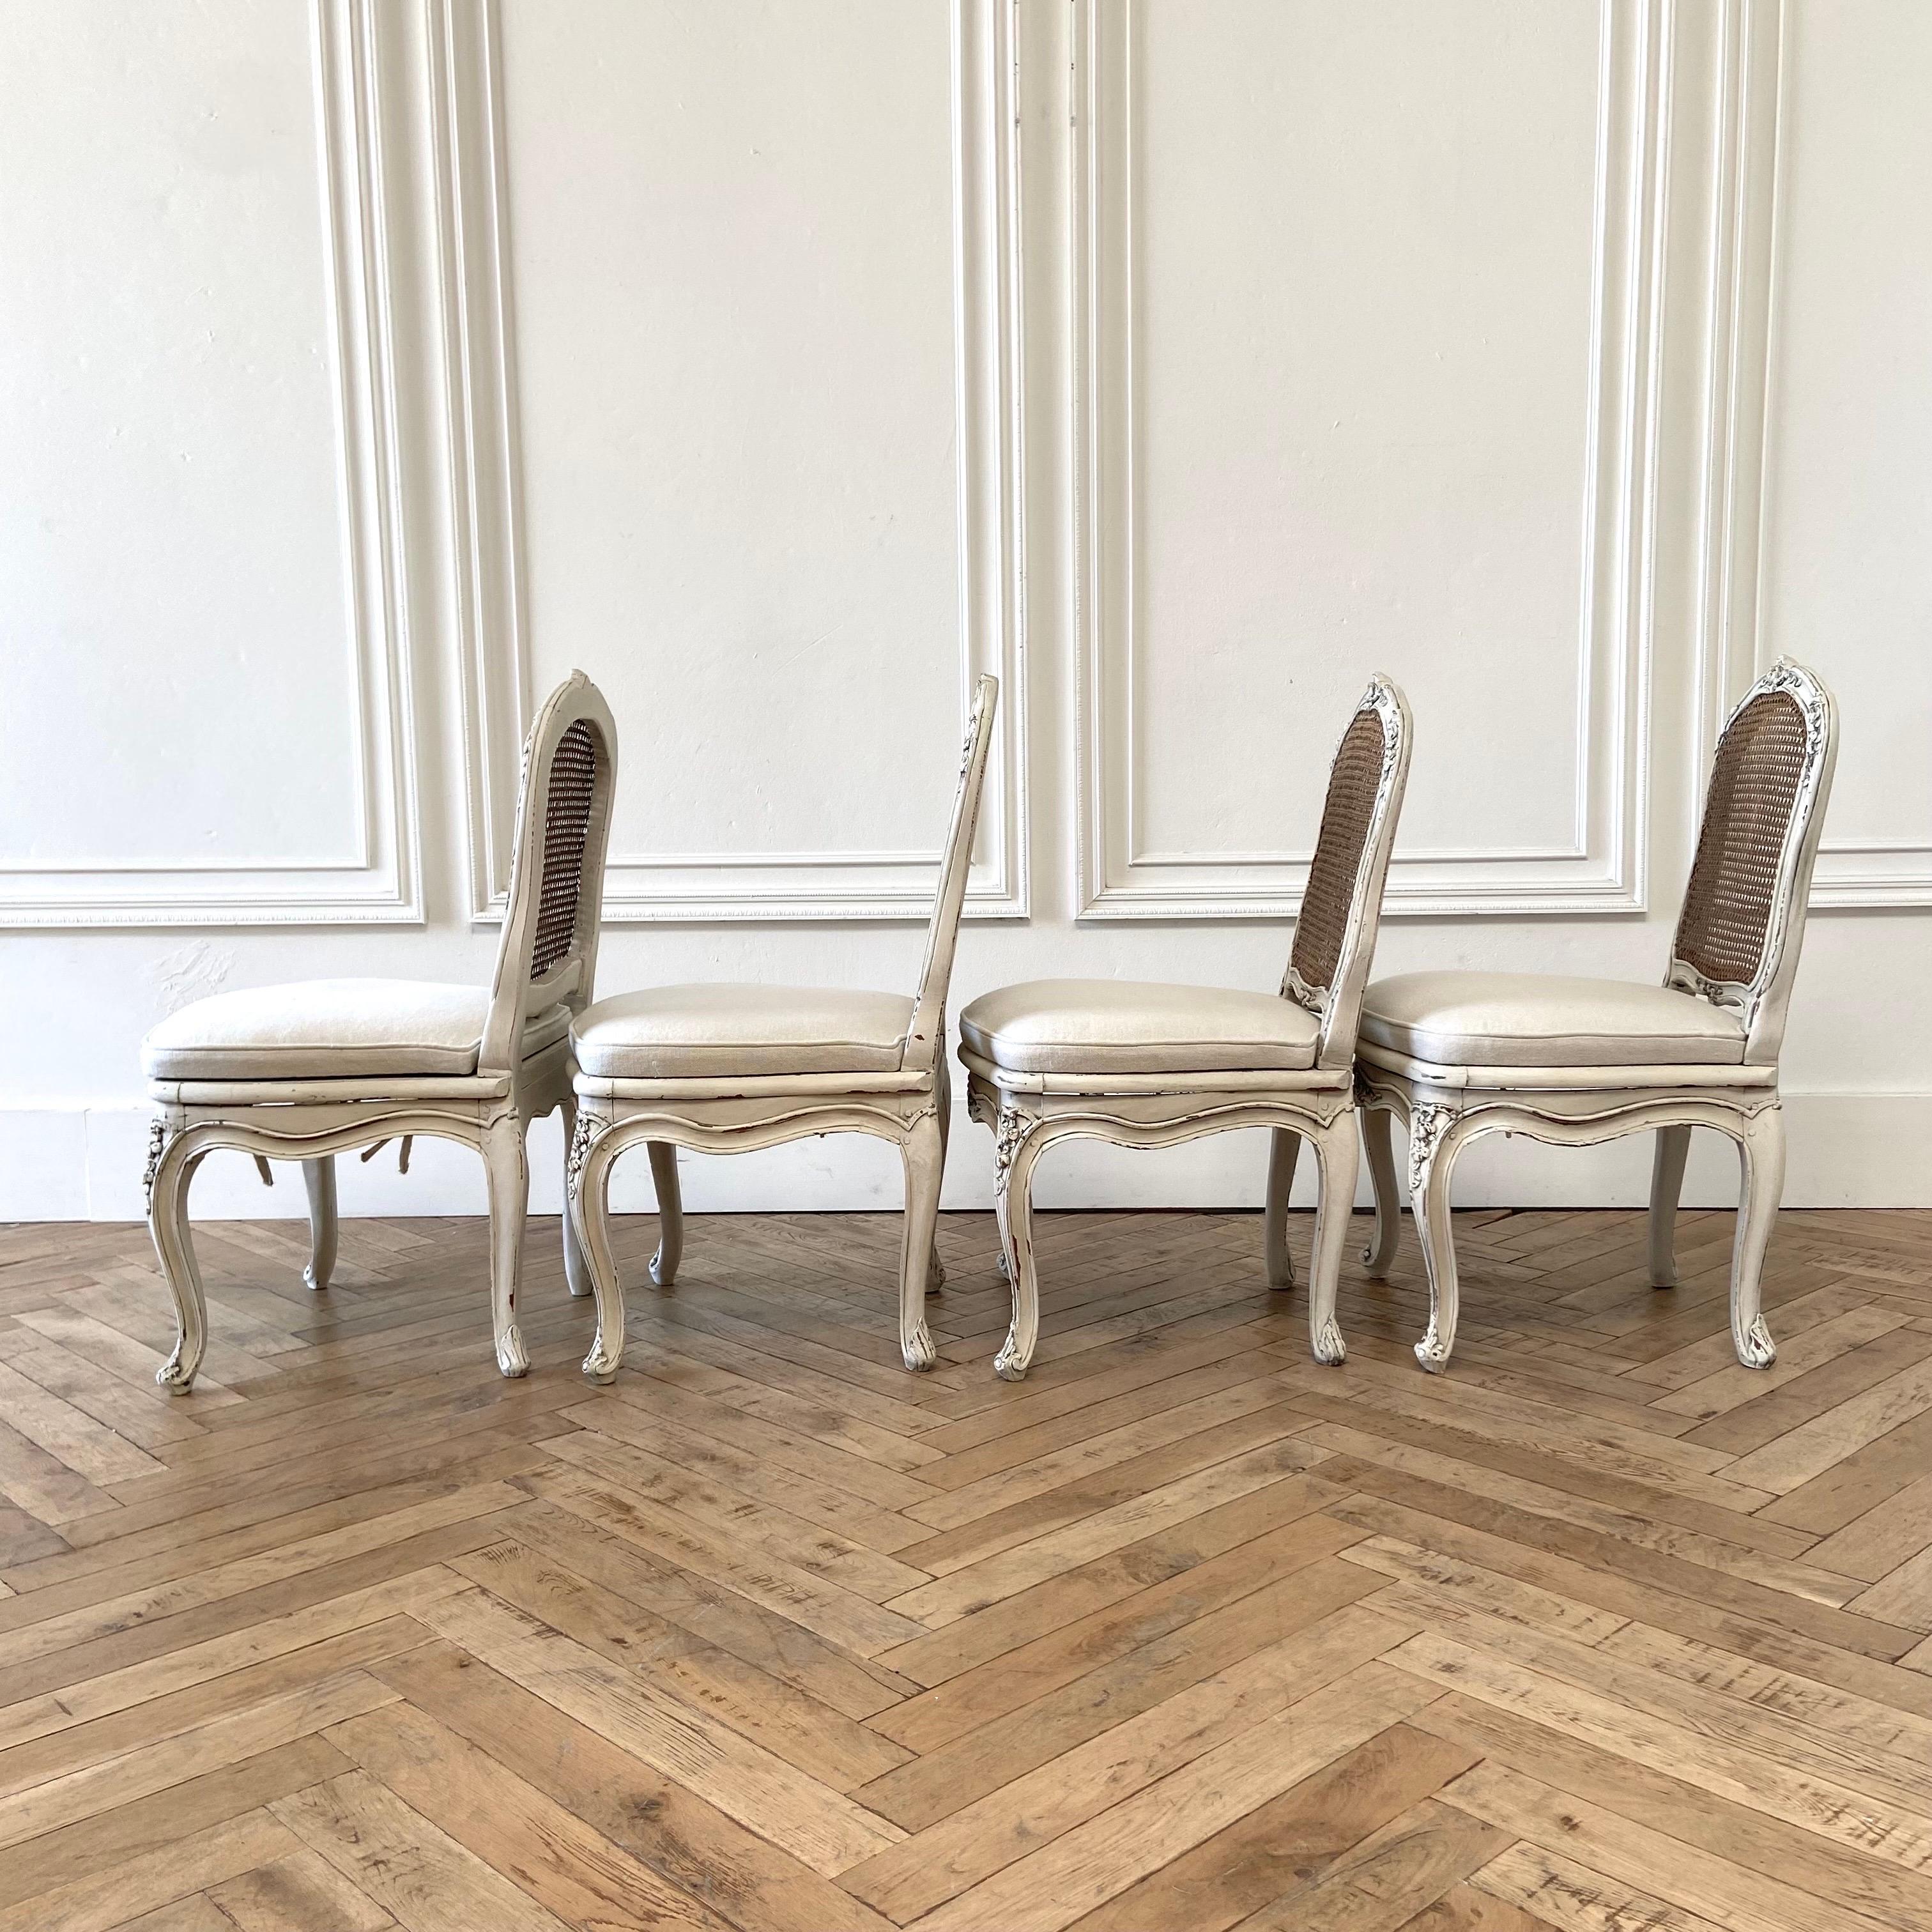 Set of 4 Antique French cane back chairs painted in a soft oyster white finish, with subtle distressed edges, and finished with an antique patina.
SIZE: 
Cane is natural finish, with beautiful patina.
Newly constructed seats from an HR foam,